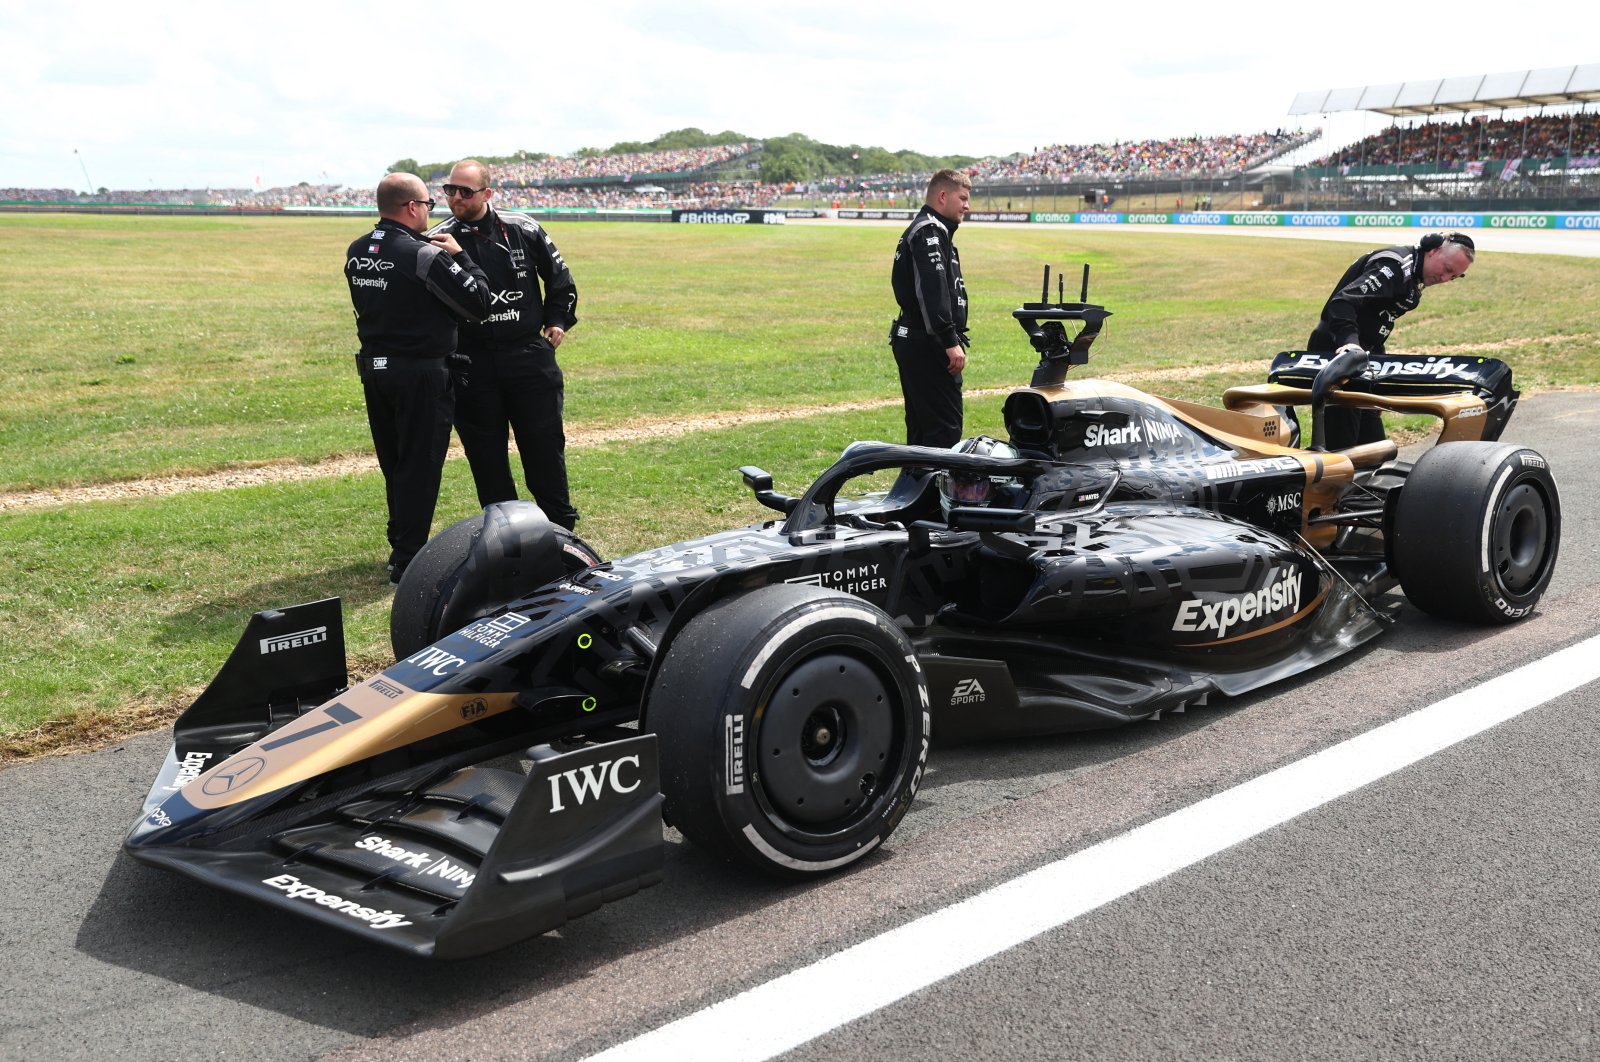 The car of the fictional Apex team for a Formula One-inspired movie featuring Brad Pitt is pictured before the start of the race at Silverstone Circuit, Silverstone, U.K., July 9, 2023. (Reuters Photo)